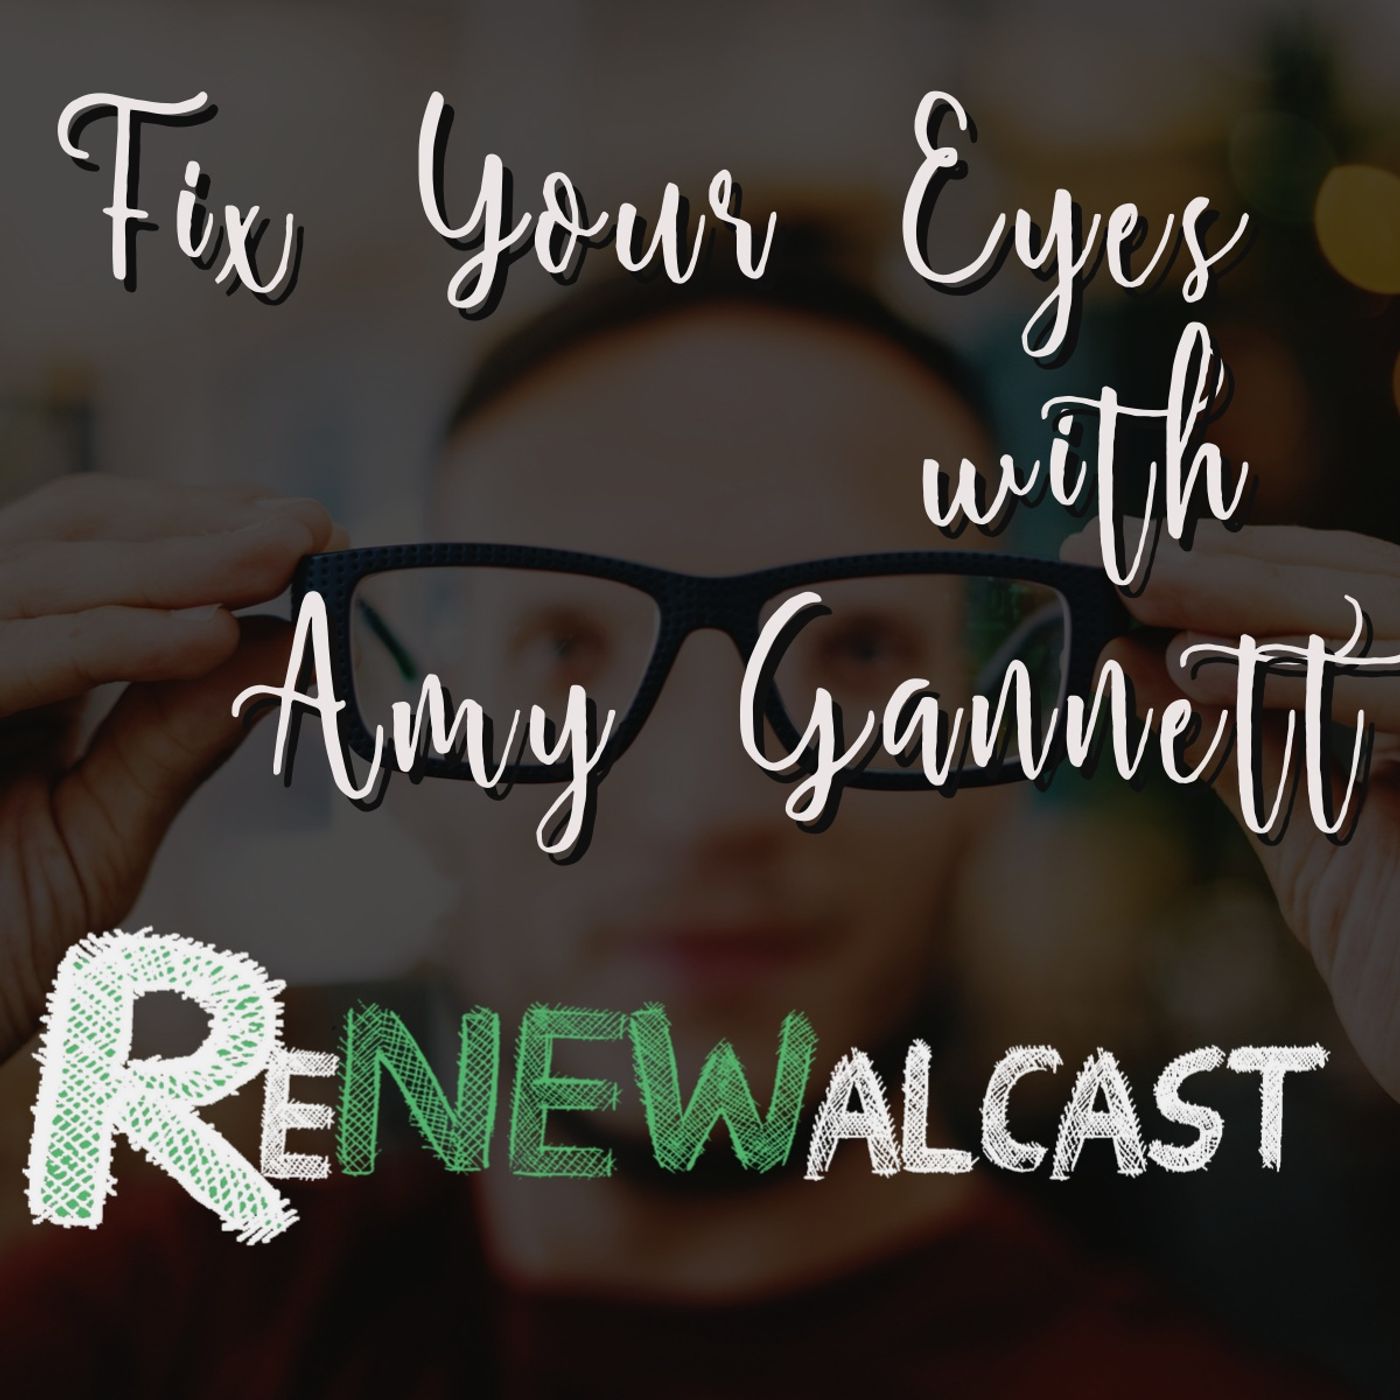 Fix Your Eyes with Amy Gannet